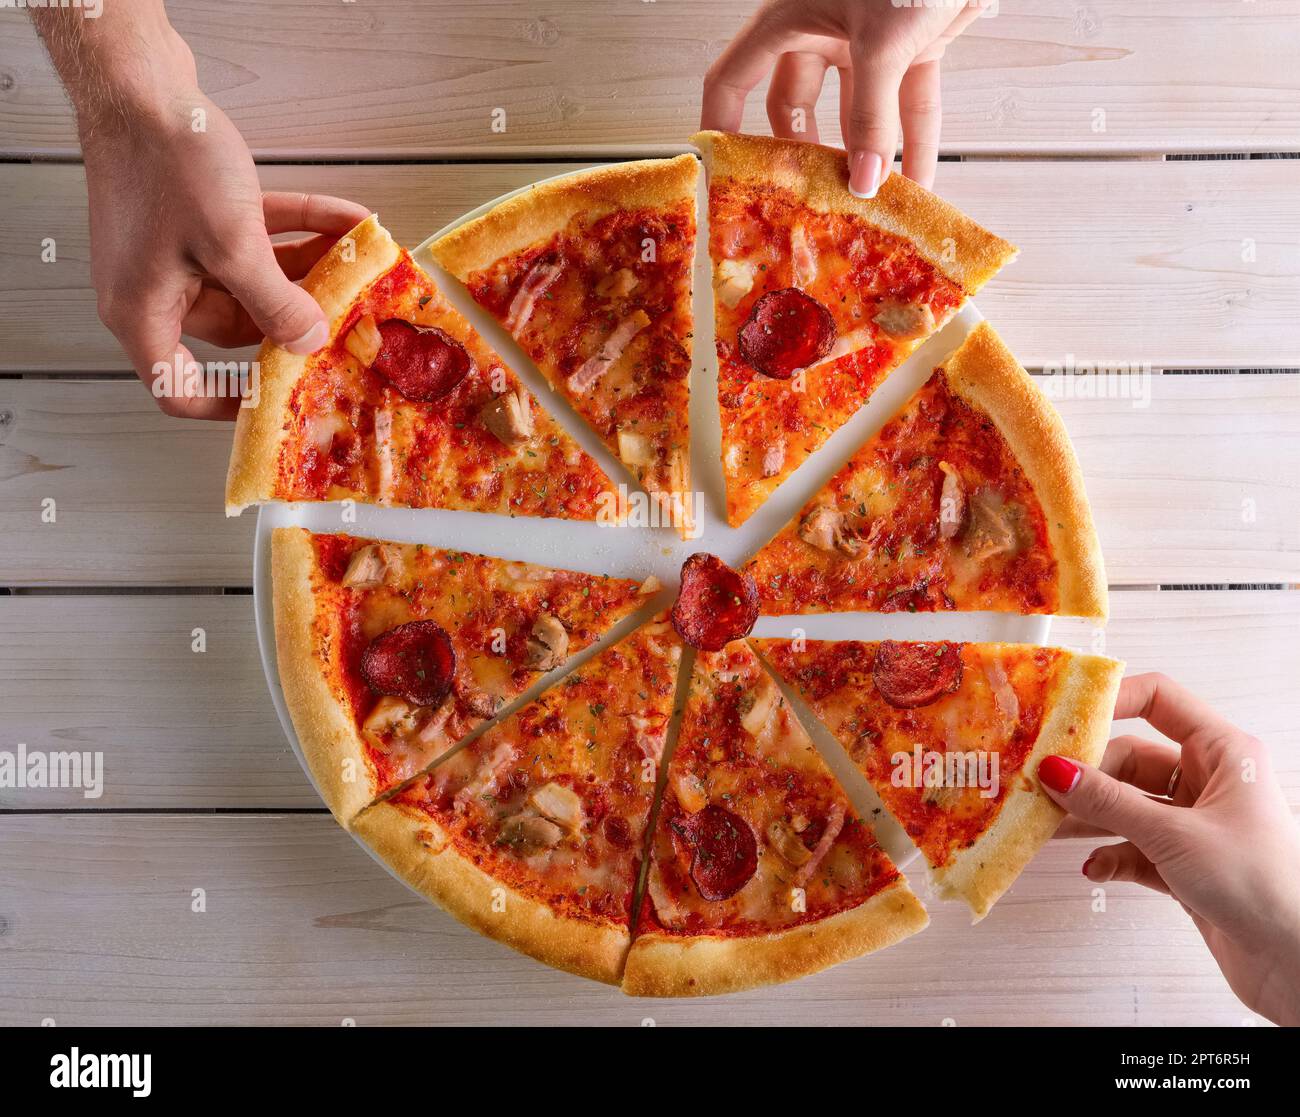 Close-up of people hands taking slices of pizza. Sharing food. Group of friends having pizza together. Stock Photo